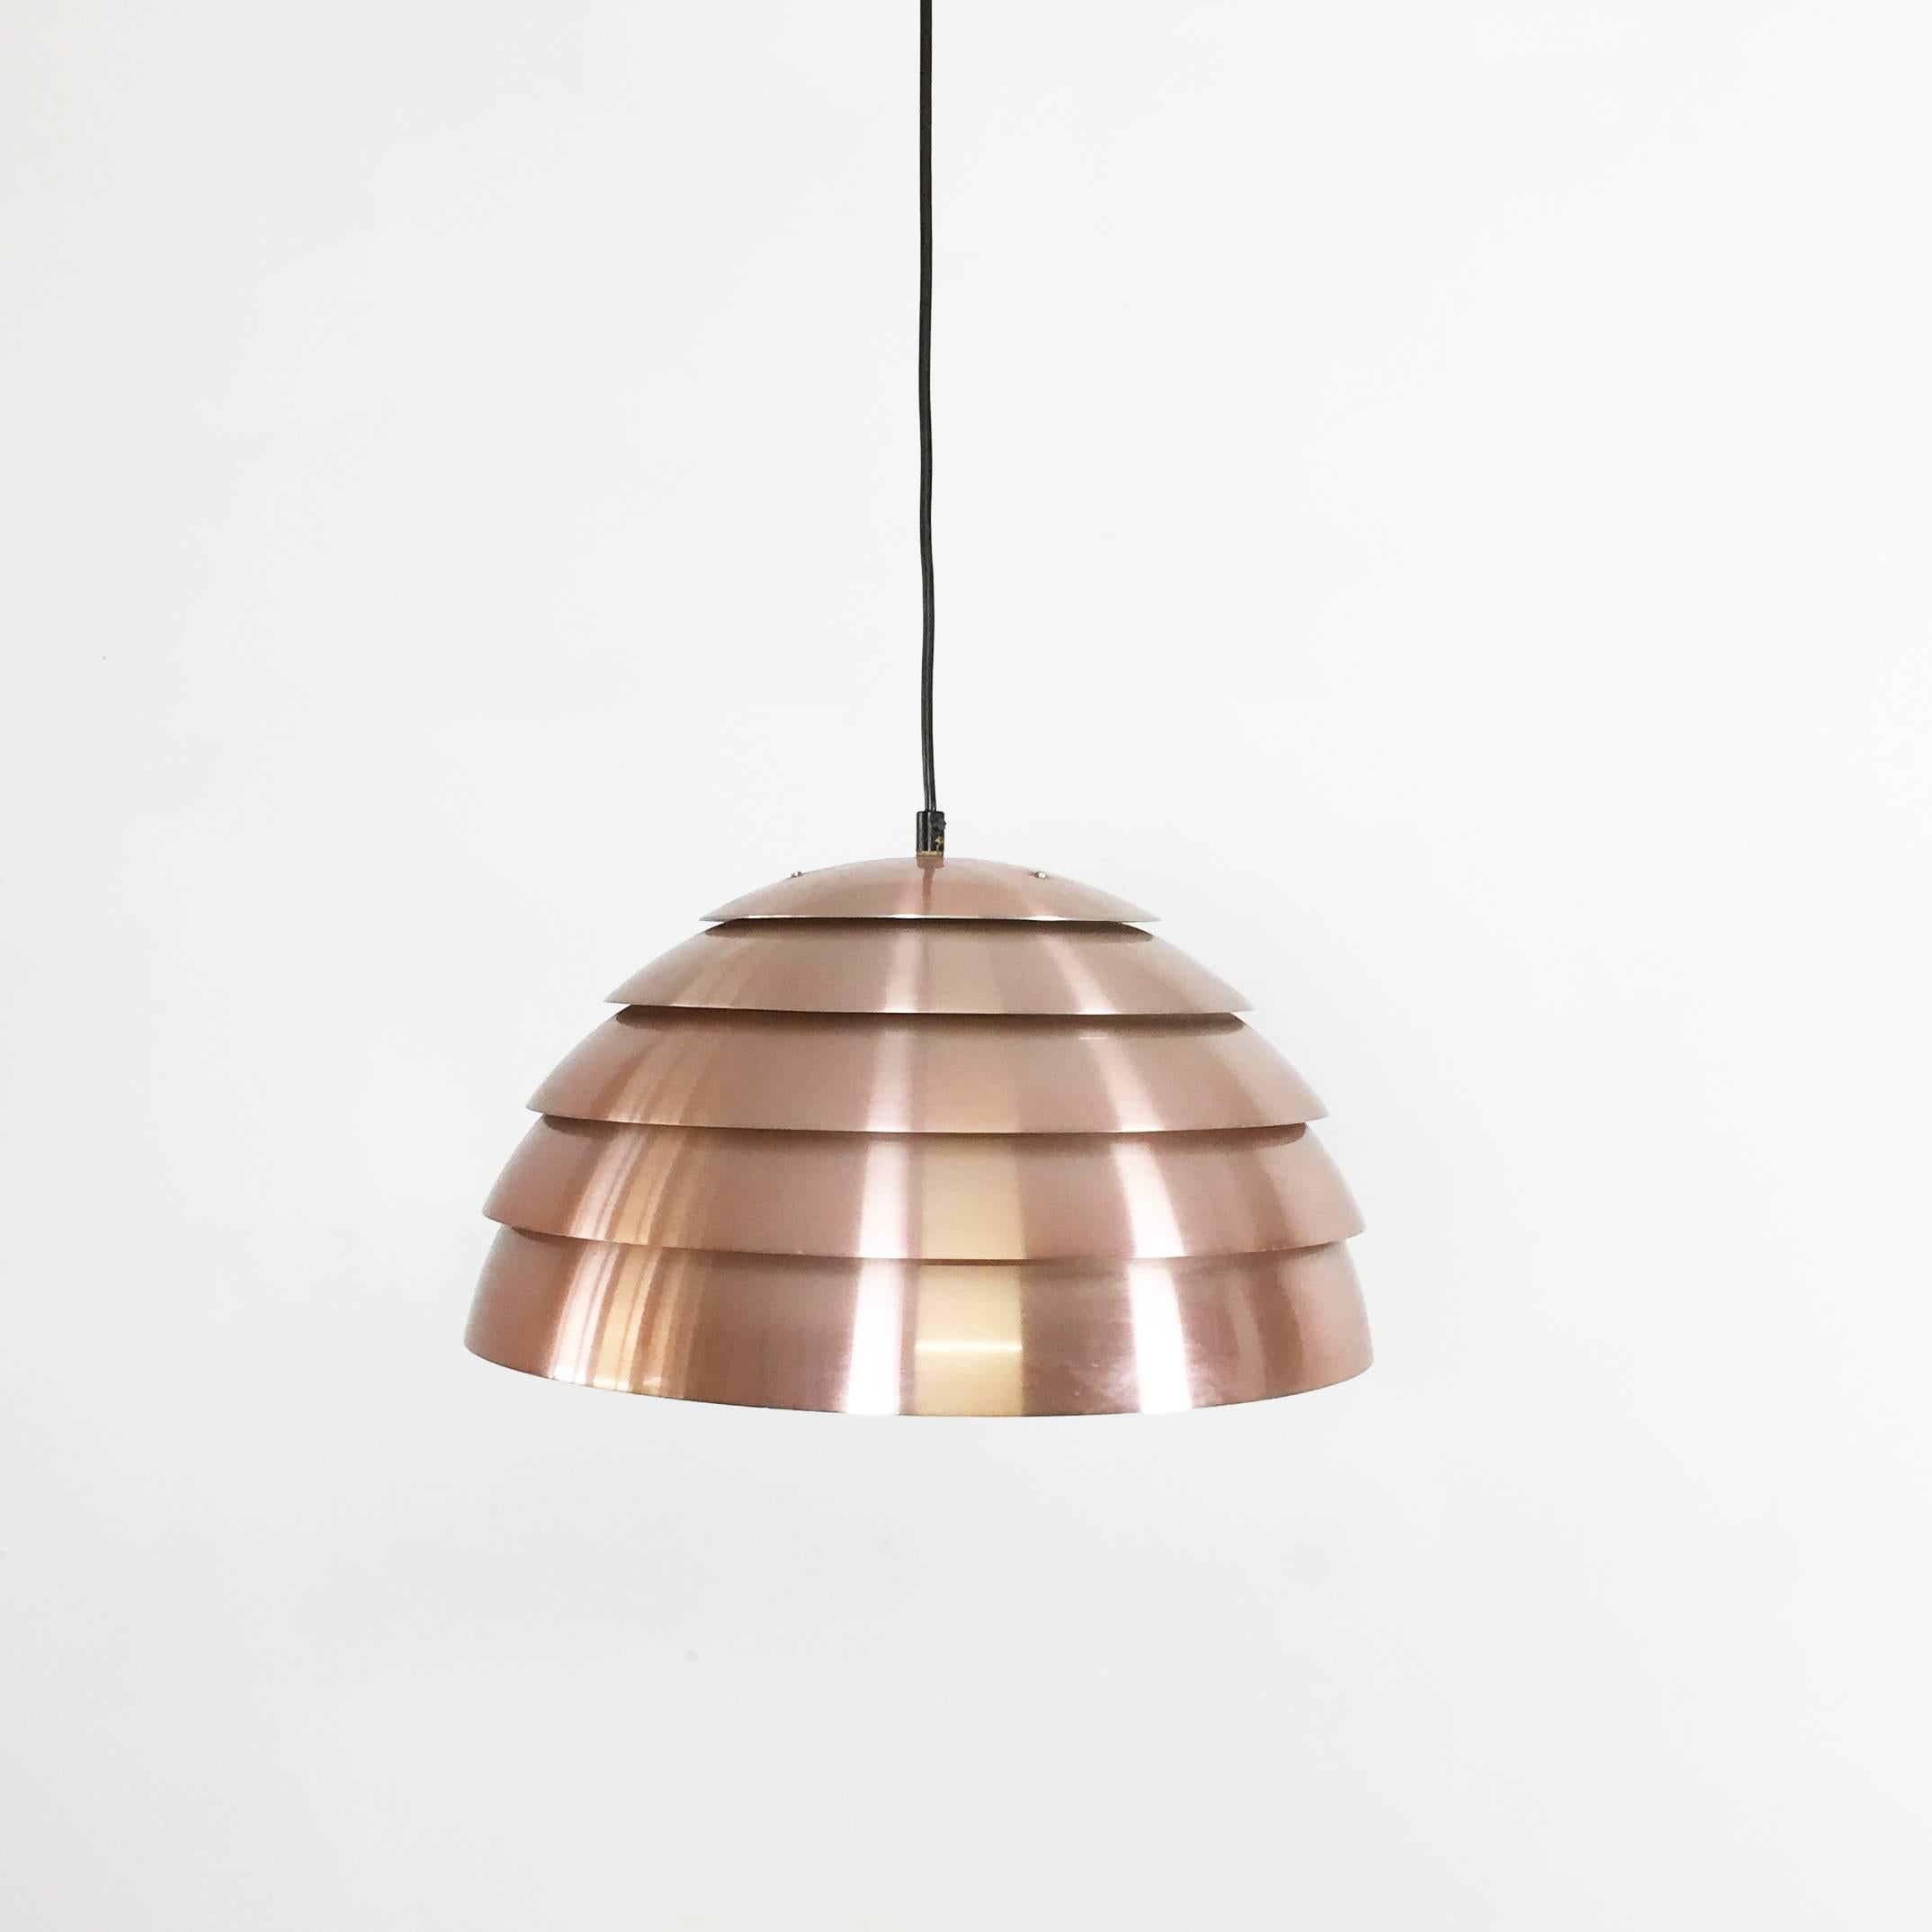 Copper pendant light by Hans-Agne Jakobsson.

Producer Hans-Agne Jakobsson A.B. Markaryd, Sweden.

1960s.

This pendant light was designed by Hans-Agne Jakobsson in the 1950s and produced by his own company, Hans-Agne Jakobsson A. B. in